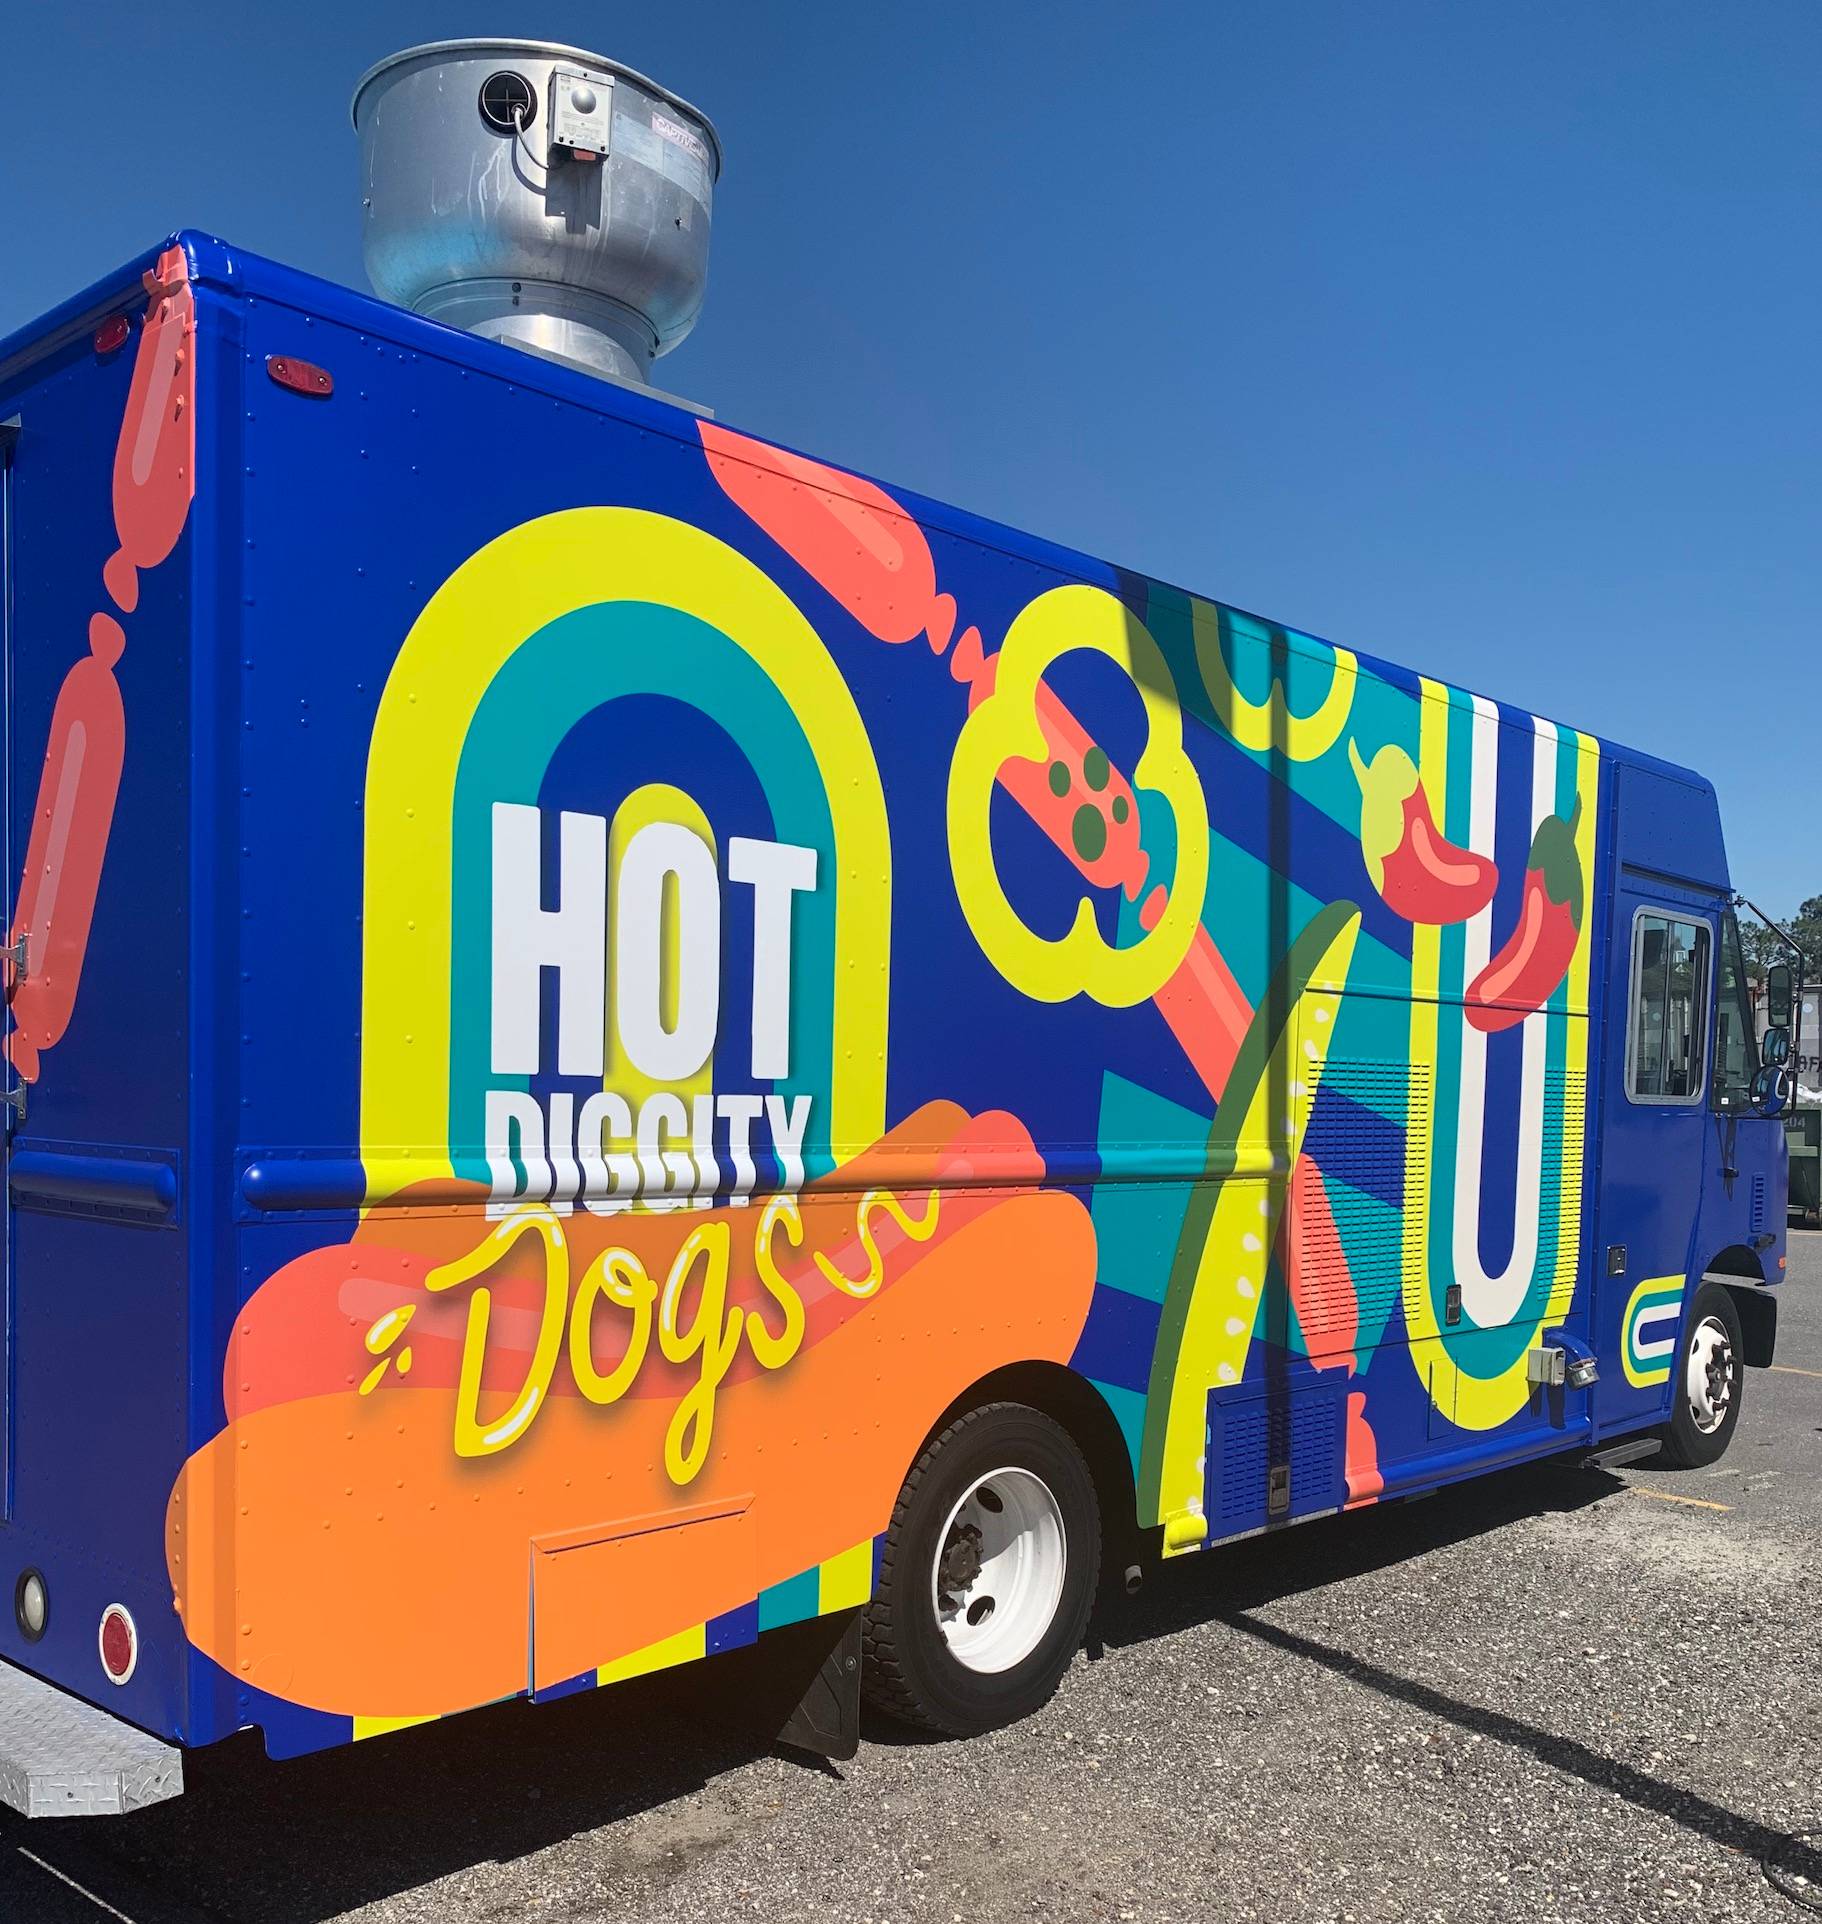 PHOTOS - First look at the food from the new Hot Diggity Dogs food truck opening tomorrow at Disney Springs